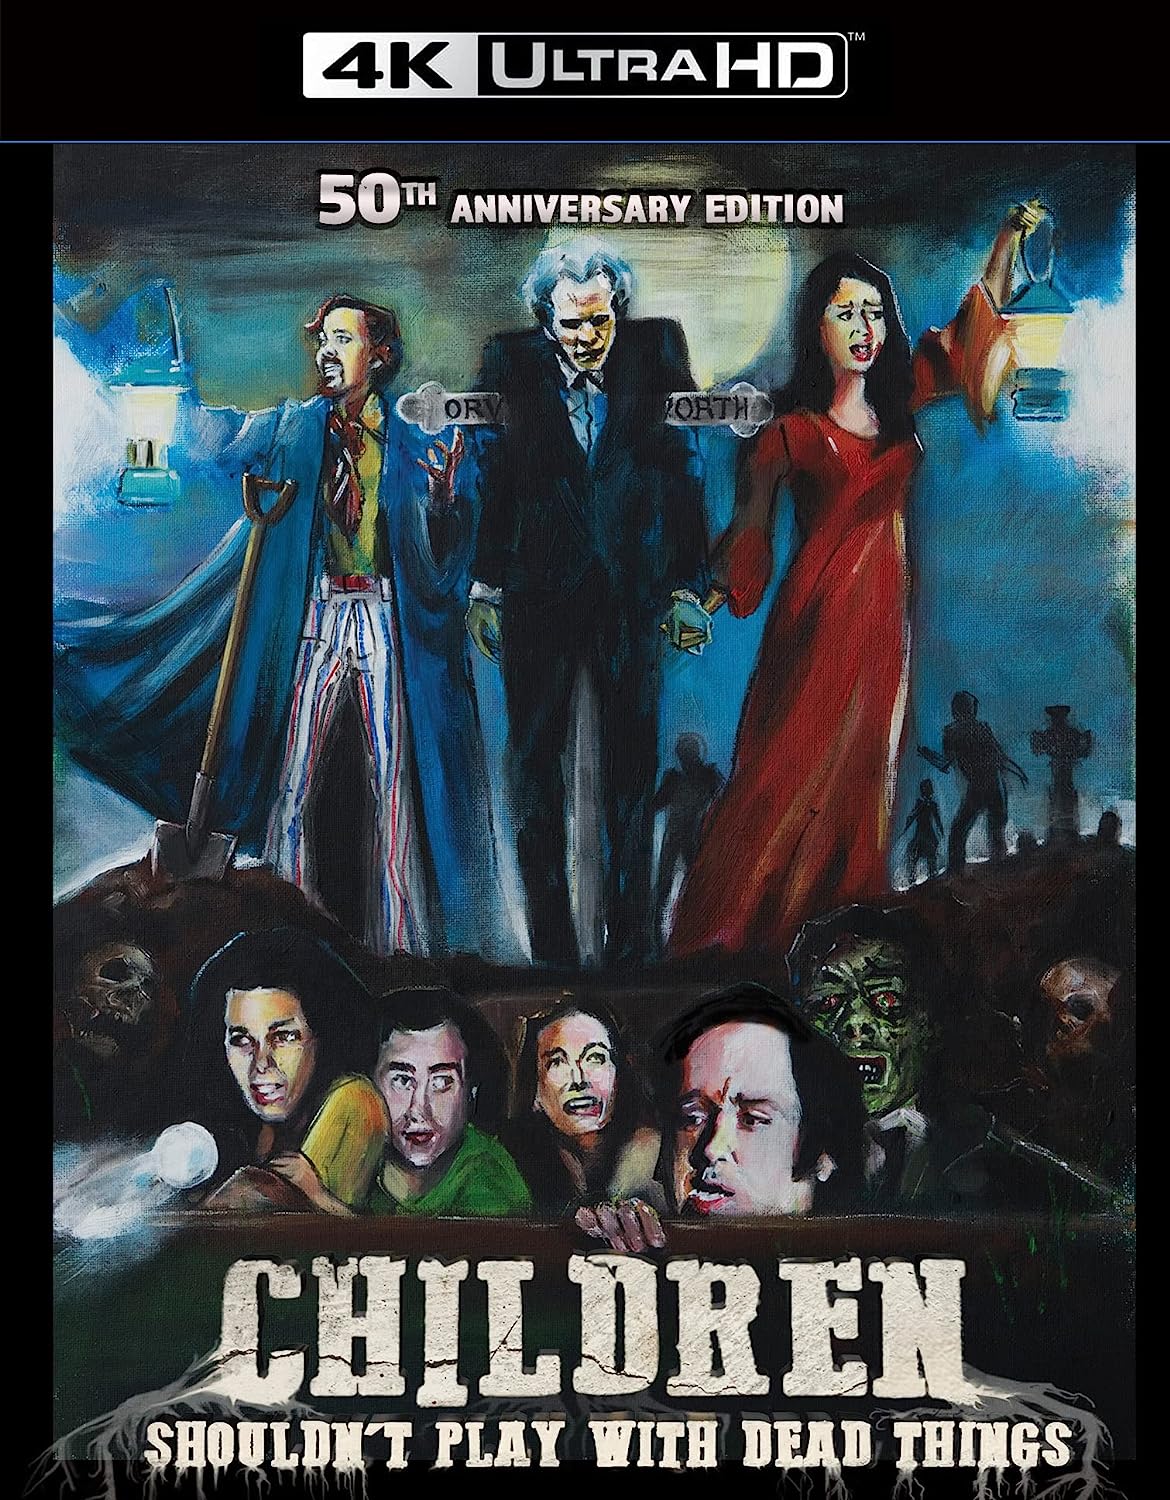 Children Shouldn't Play With Dead Things (3-Disc 50th Anniversary Edition) - Darkside Records